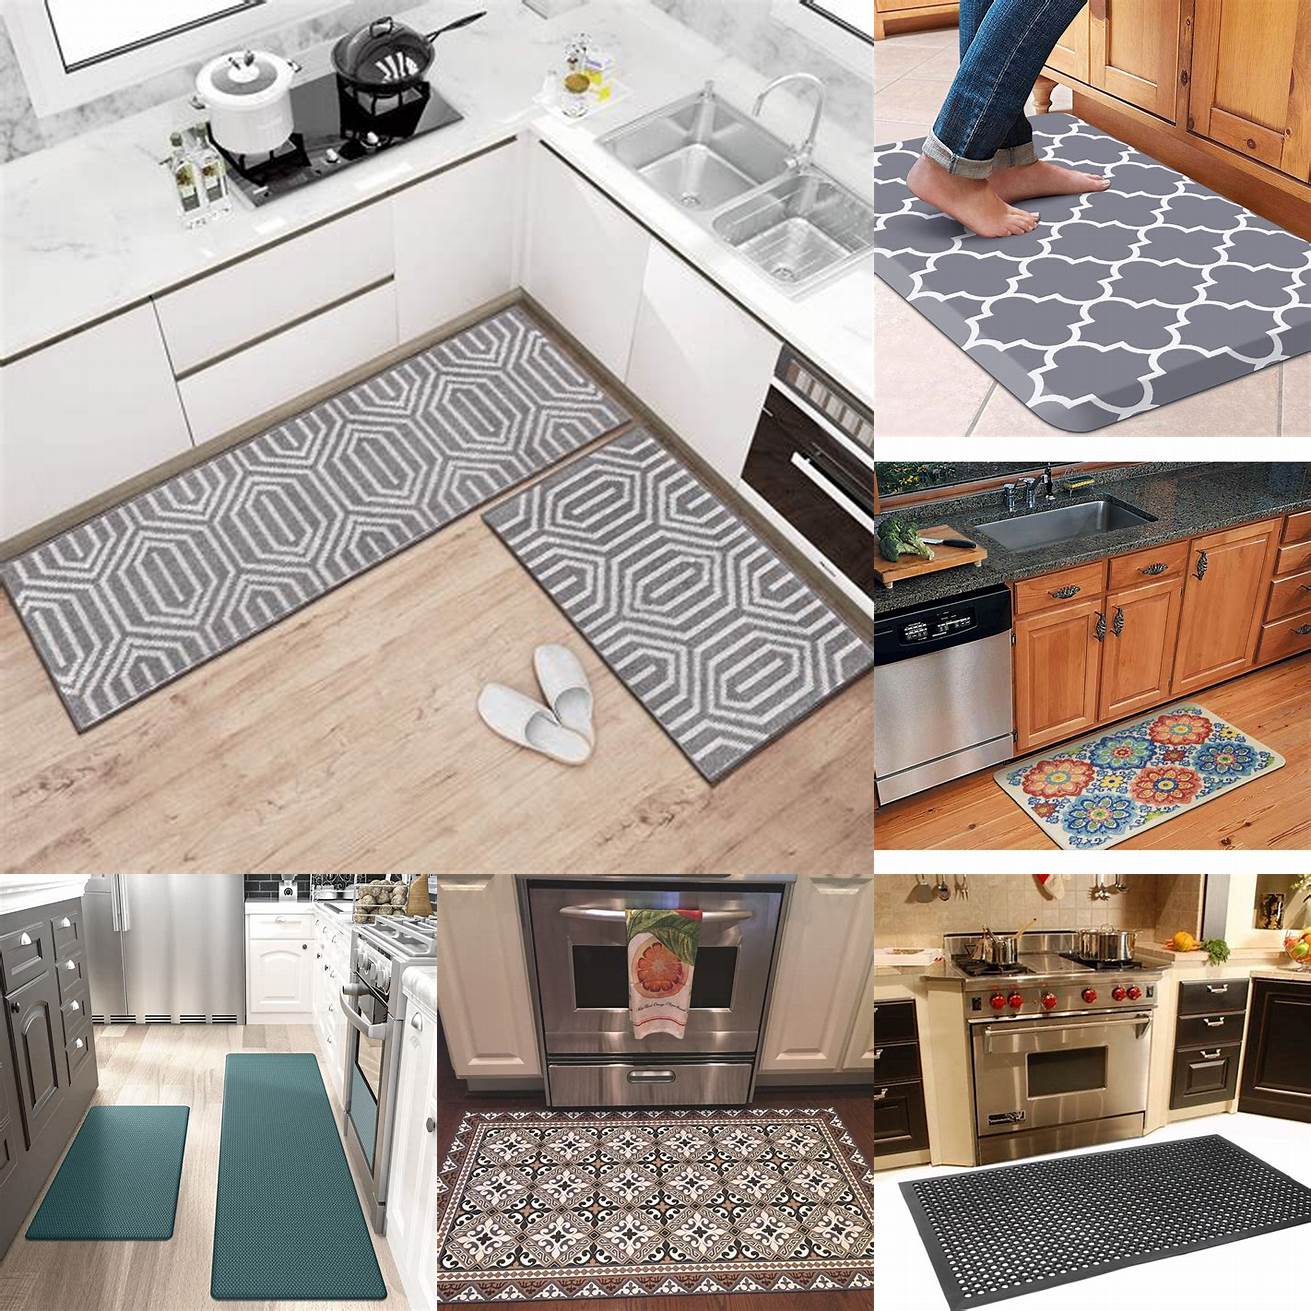 Adds style to your kitchen - Kitchen floor mats come in a variety of colors patterns and designs You can choose a mat that complements your kitchen decor and adds a touch of personality to your space